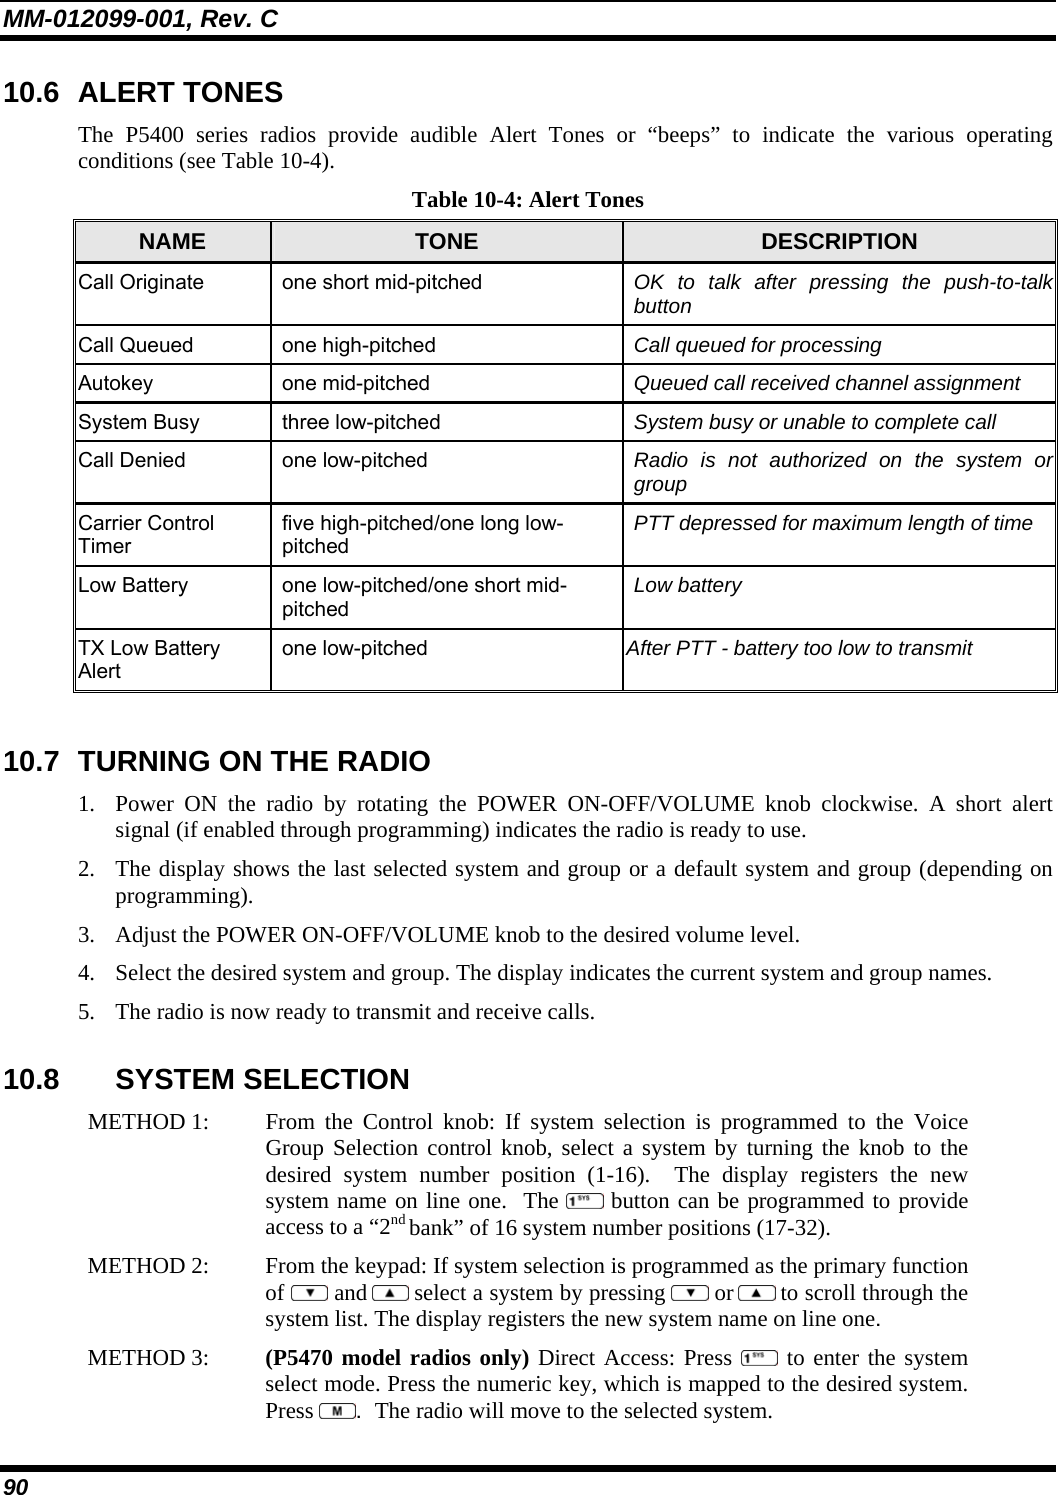 MM-012099-001, Rev. C 90 10.6 ALERT TONES The P5400 series radios provide audible Alert Tones or “beeps” to indicate the various operating conditions (see Table 10-4). Table 10-4: Alert Tones NAME  TONE  DESCRIPTION Call Originate  one short mid-pitched  OK to talk after pressing the push-to-talk button Call Queued  one high-pitched  Call queued for processing Autokey one mid-pitched  Queued call received channel assignment System Busy  three low-pitched  System busy or unable to complete call Call Denied  one low-pitched  Radio is not authorized on the system or group Carrier Control Timer five high-pitched/one long low-pitched PTT depressed for maximum length of time Low Battery  one low-pitched/one short mid-pitched Low battery TX Low Battery Alert one low-pitched  After PTT - battery too low to transmit  10.7  TURNING ON THE RADIO 1. Power ON the radio by rotating the POWER ON-OFF/VOLUME knob clockwise. A short alert signal (if enabled through programming) indicates the radio is ready to use.  2. The display shows the last selected system and group or a default system and group (depending on programming).  3. Adjust the POWER ON-OFF/VOLUME knob to the desired volume level.  4. Select the desired system and group. The display indicates the current system and group names.  5. The radio is now ready to transmit and receive calls. 10.8 SYSTEM SELECTION METHOD 1:   From the Control knob: If system selection is programmed to the Voice Group Selection control knob, select a system by turning the knob to thedesired system number position (1-16).  The display registers the new system name on line one.  The  button can be programmed to provide access to a “2nd bank” of 16 system number positions (17-32). METHOD 2:   From the keypad: If system selection is programmed as the primary function of  and  select a system by pressing   or  to scroll through the system list. The display registers the new system name on line one.  METHOD 3:   (P5470 model radios only) Direct Access: Press  to enter the system select mode. Press the numeric key, which is mapped to the desired system.Press  .  The radio will move to the selected system.  